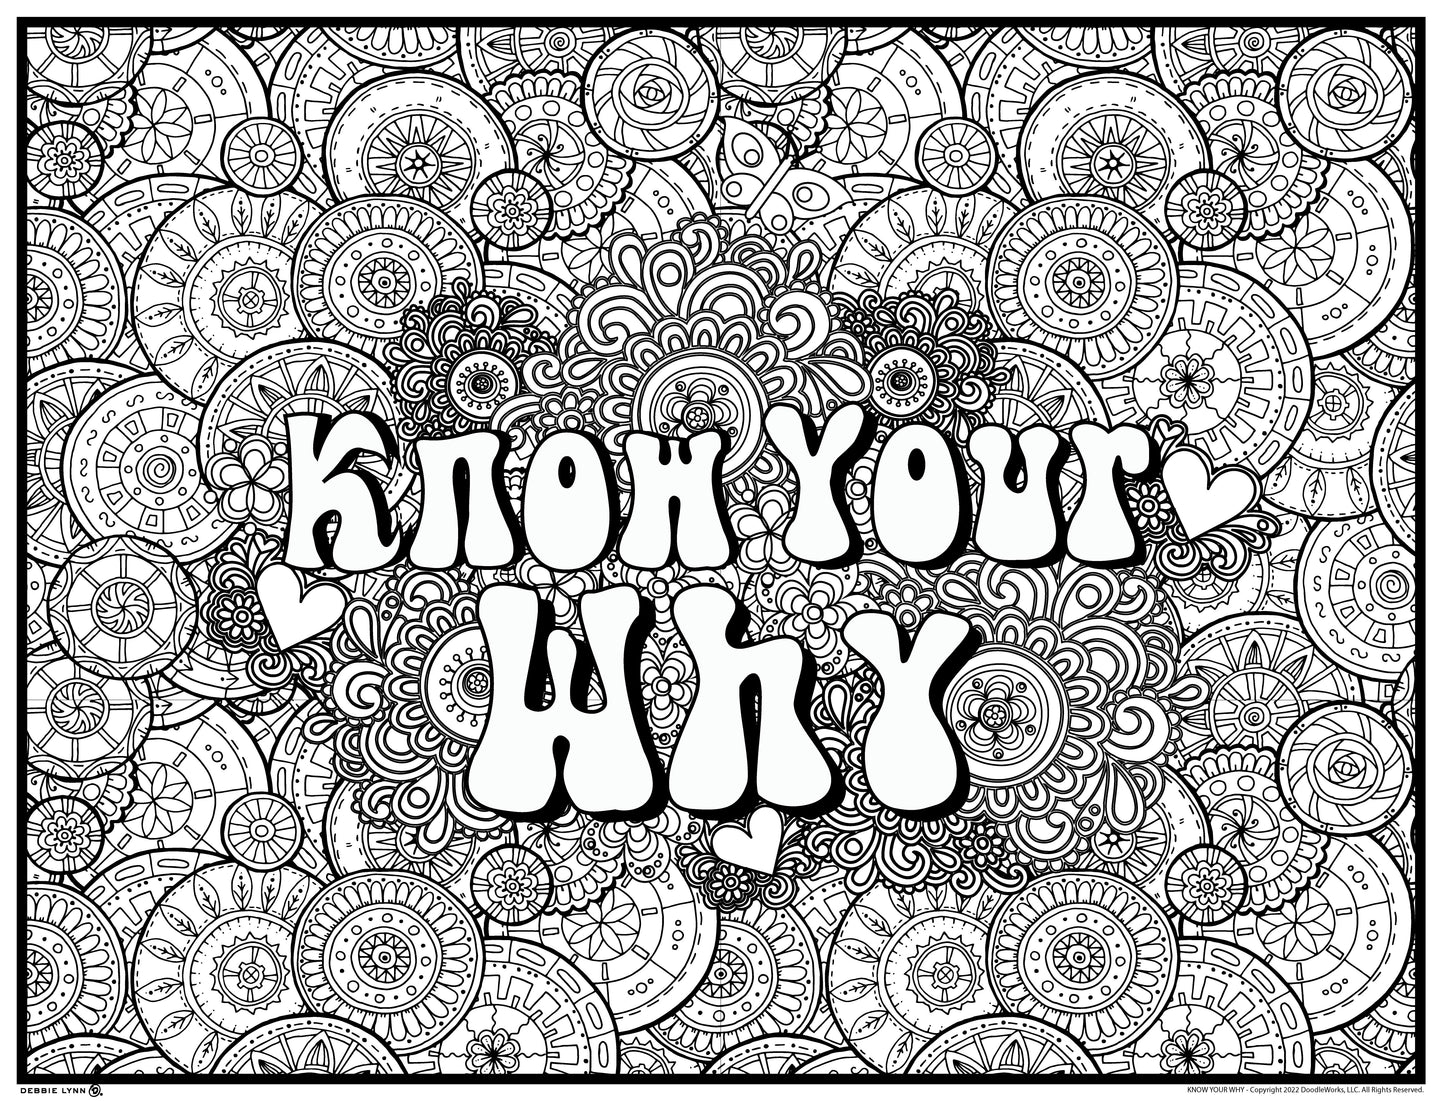 Know Your Why Personalized Giant Coloring Poster 46"x60"